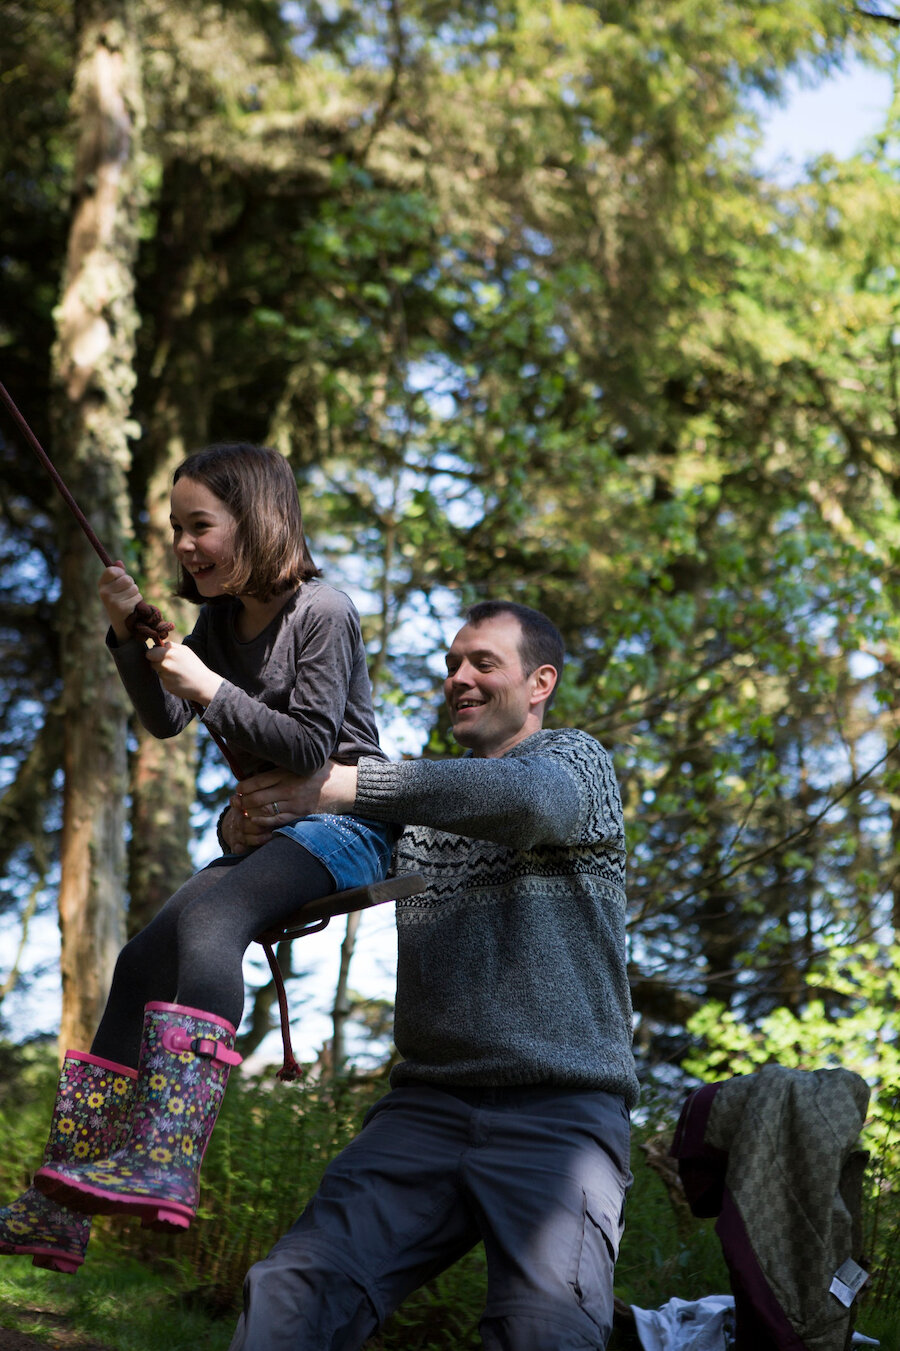 Ross and Sienna Smith on the swing at Kergord Forest | River Thompson